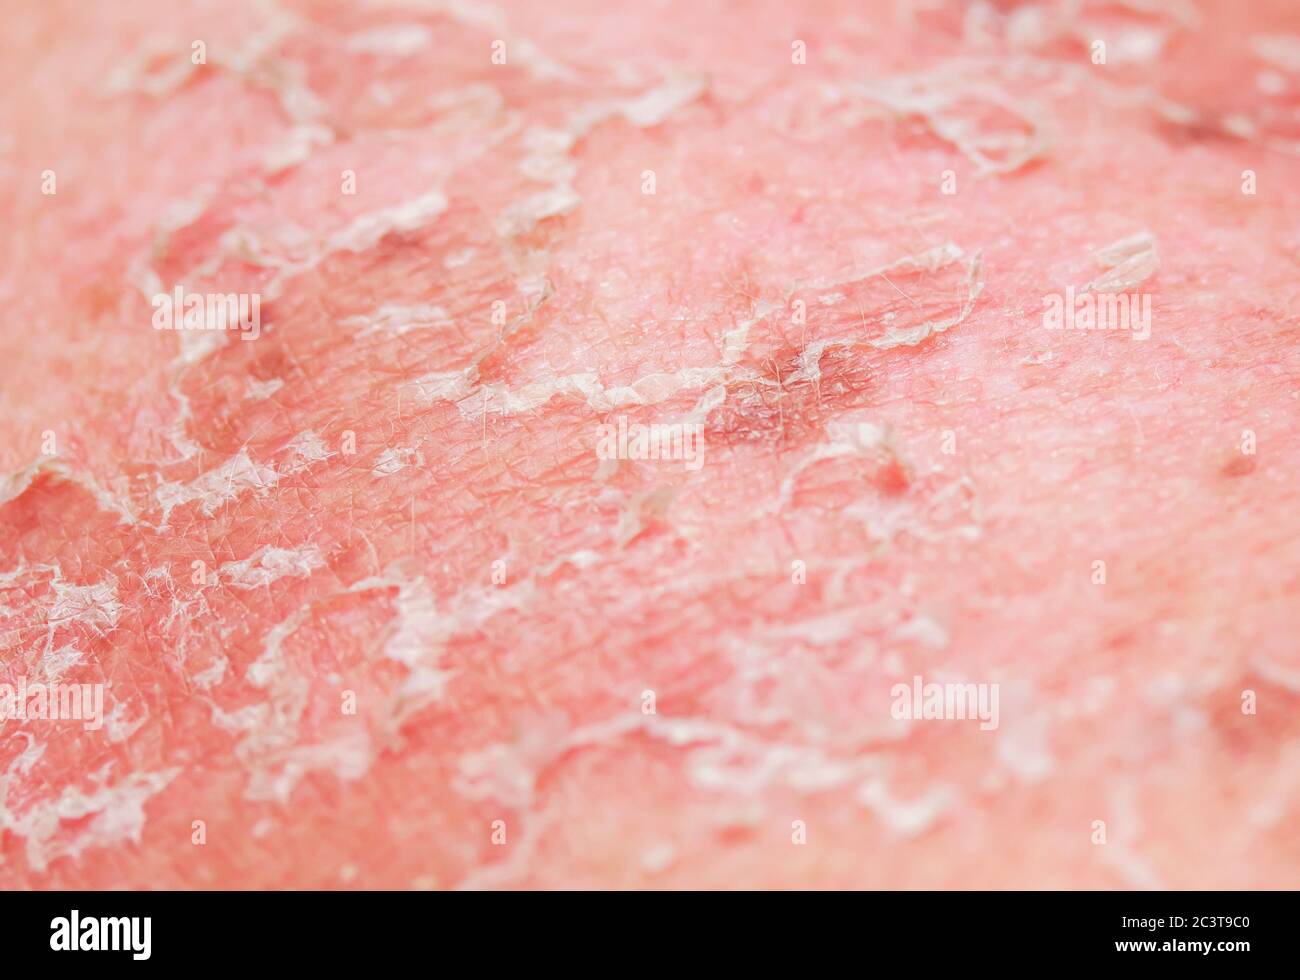 texture of irritated reddened skin with flaking scales and cracks from sunburn and allergies on the human body Stock Photo